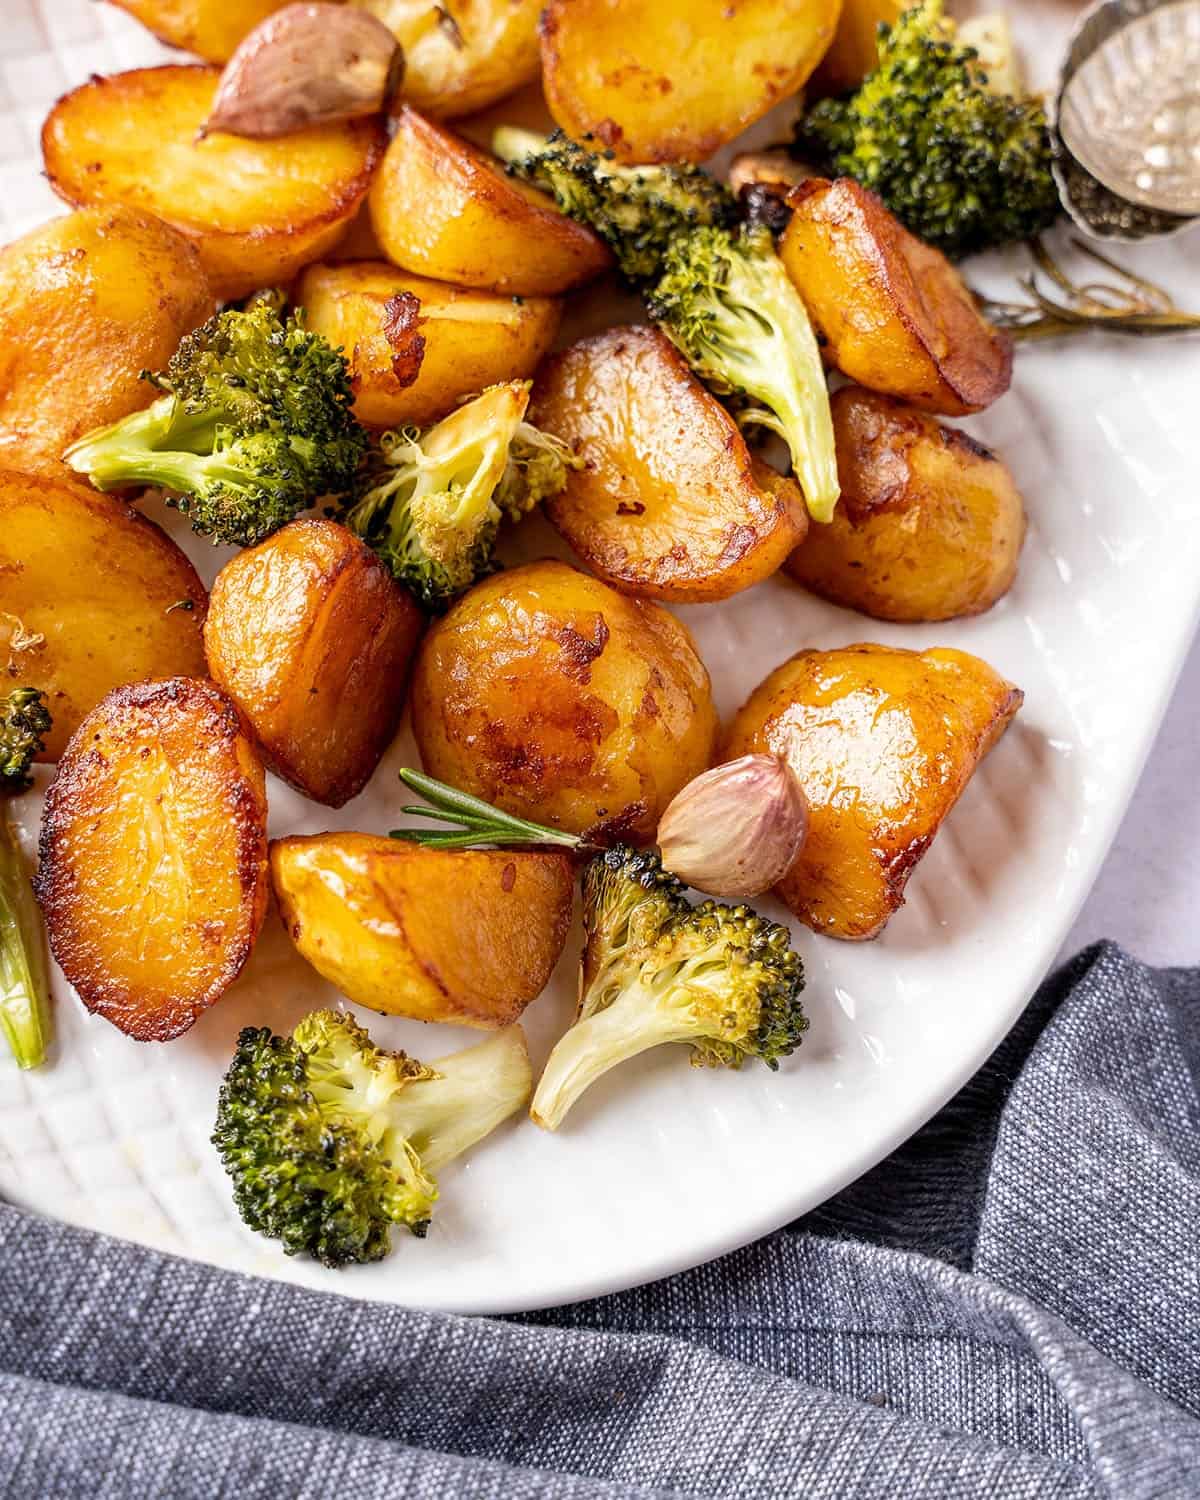 Marmite roast potatoes on a serving plate with broccoli and garlic cloves.